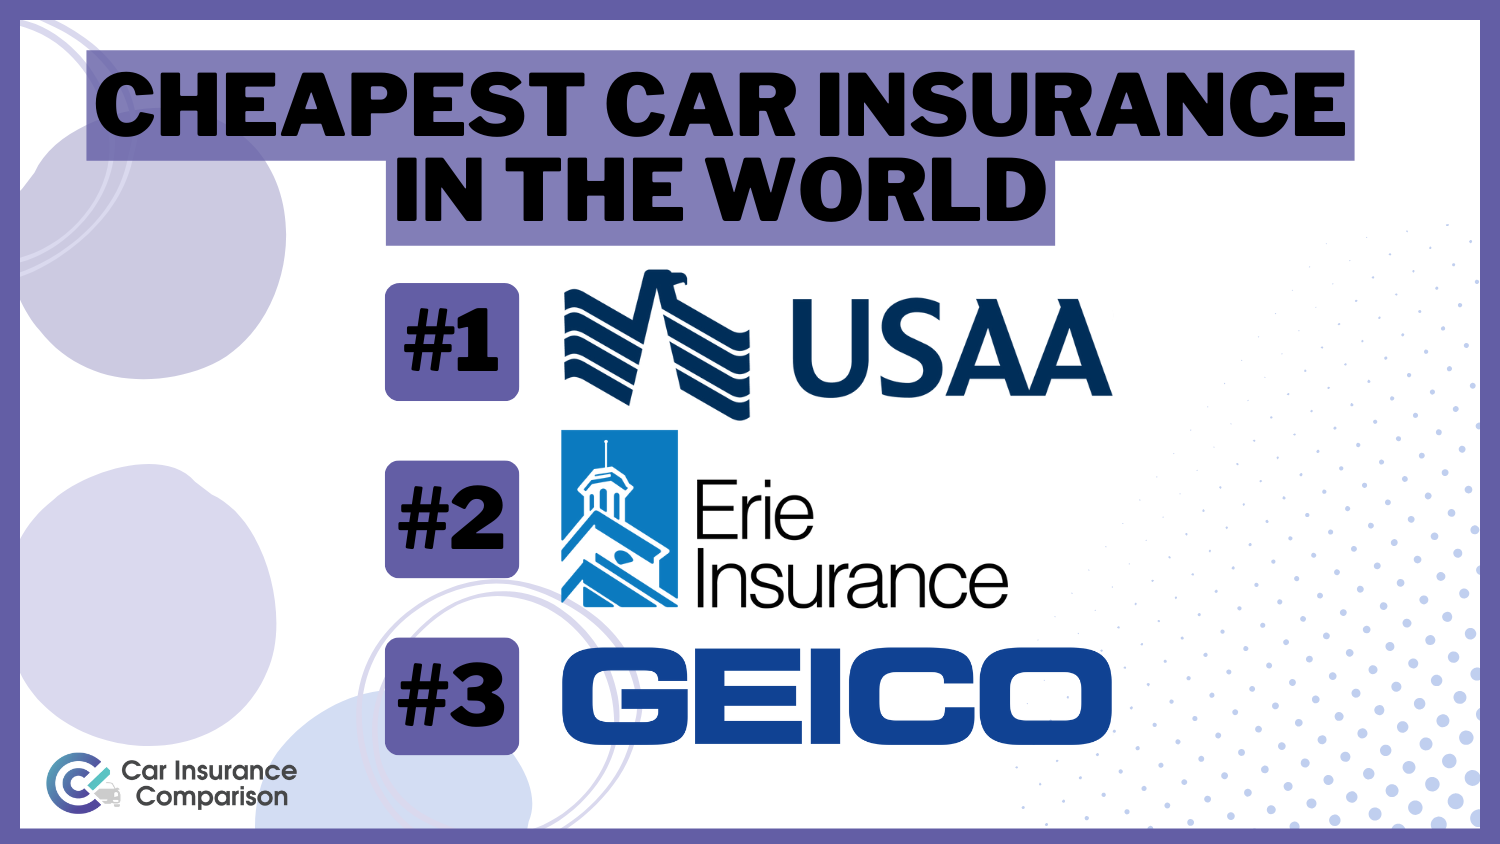 Cheapest Car Insurance in the World: USAA, Erie, and Geico